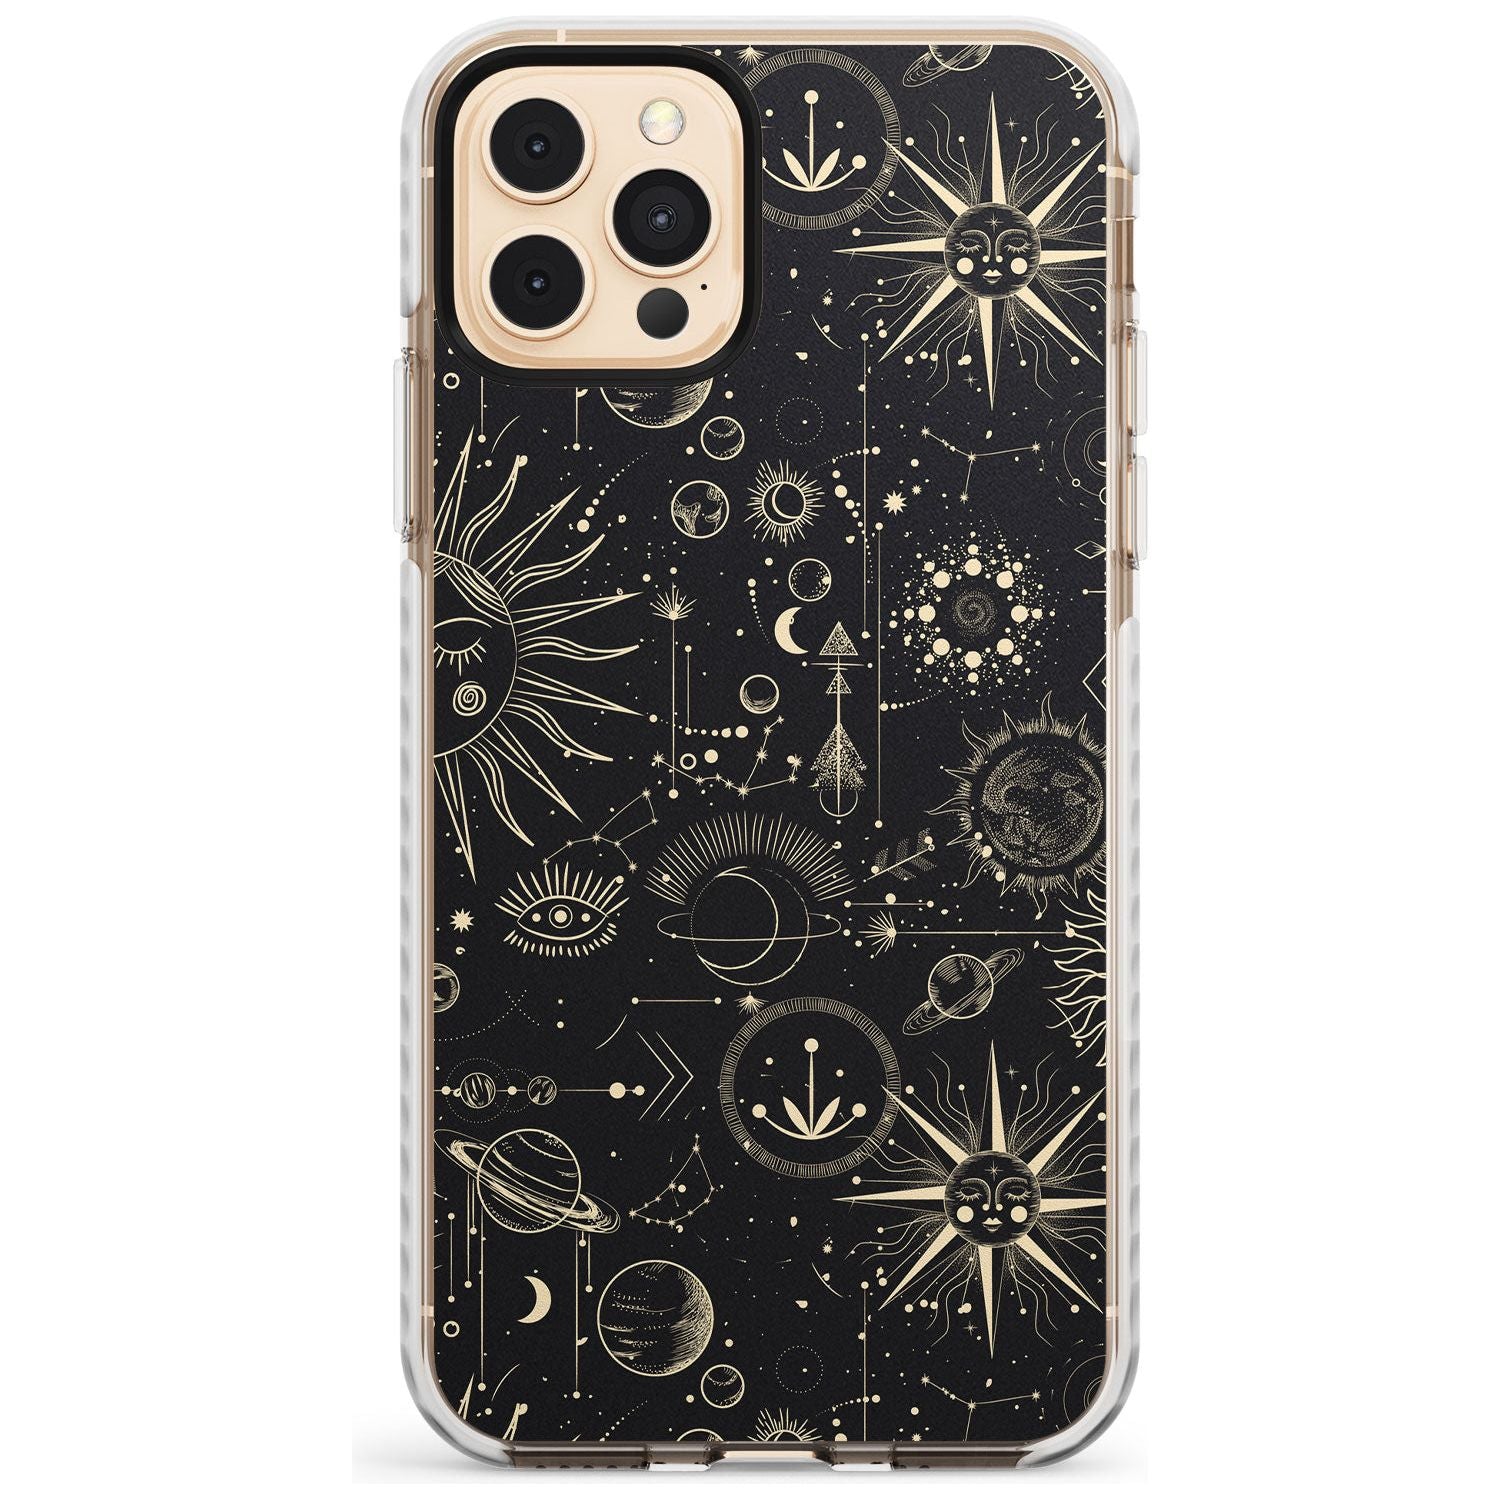 Suns & Planets Slim TPU Phone Case for iPhone 11 Pro Max